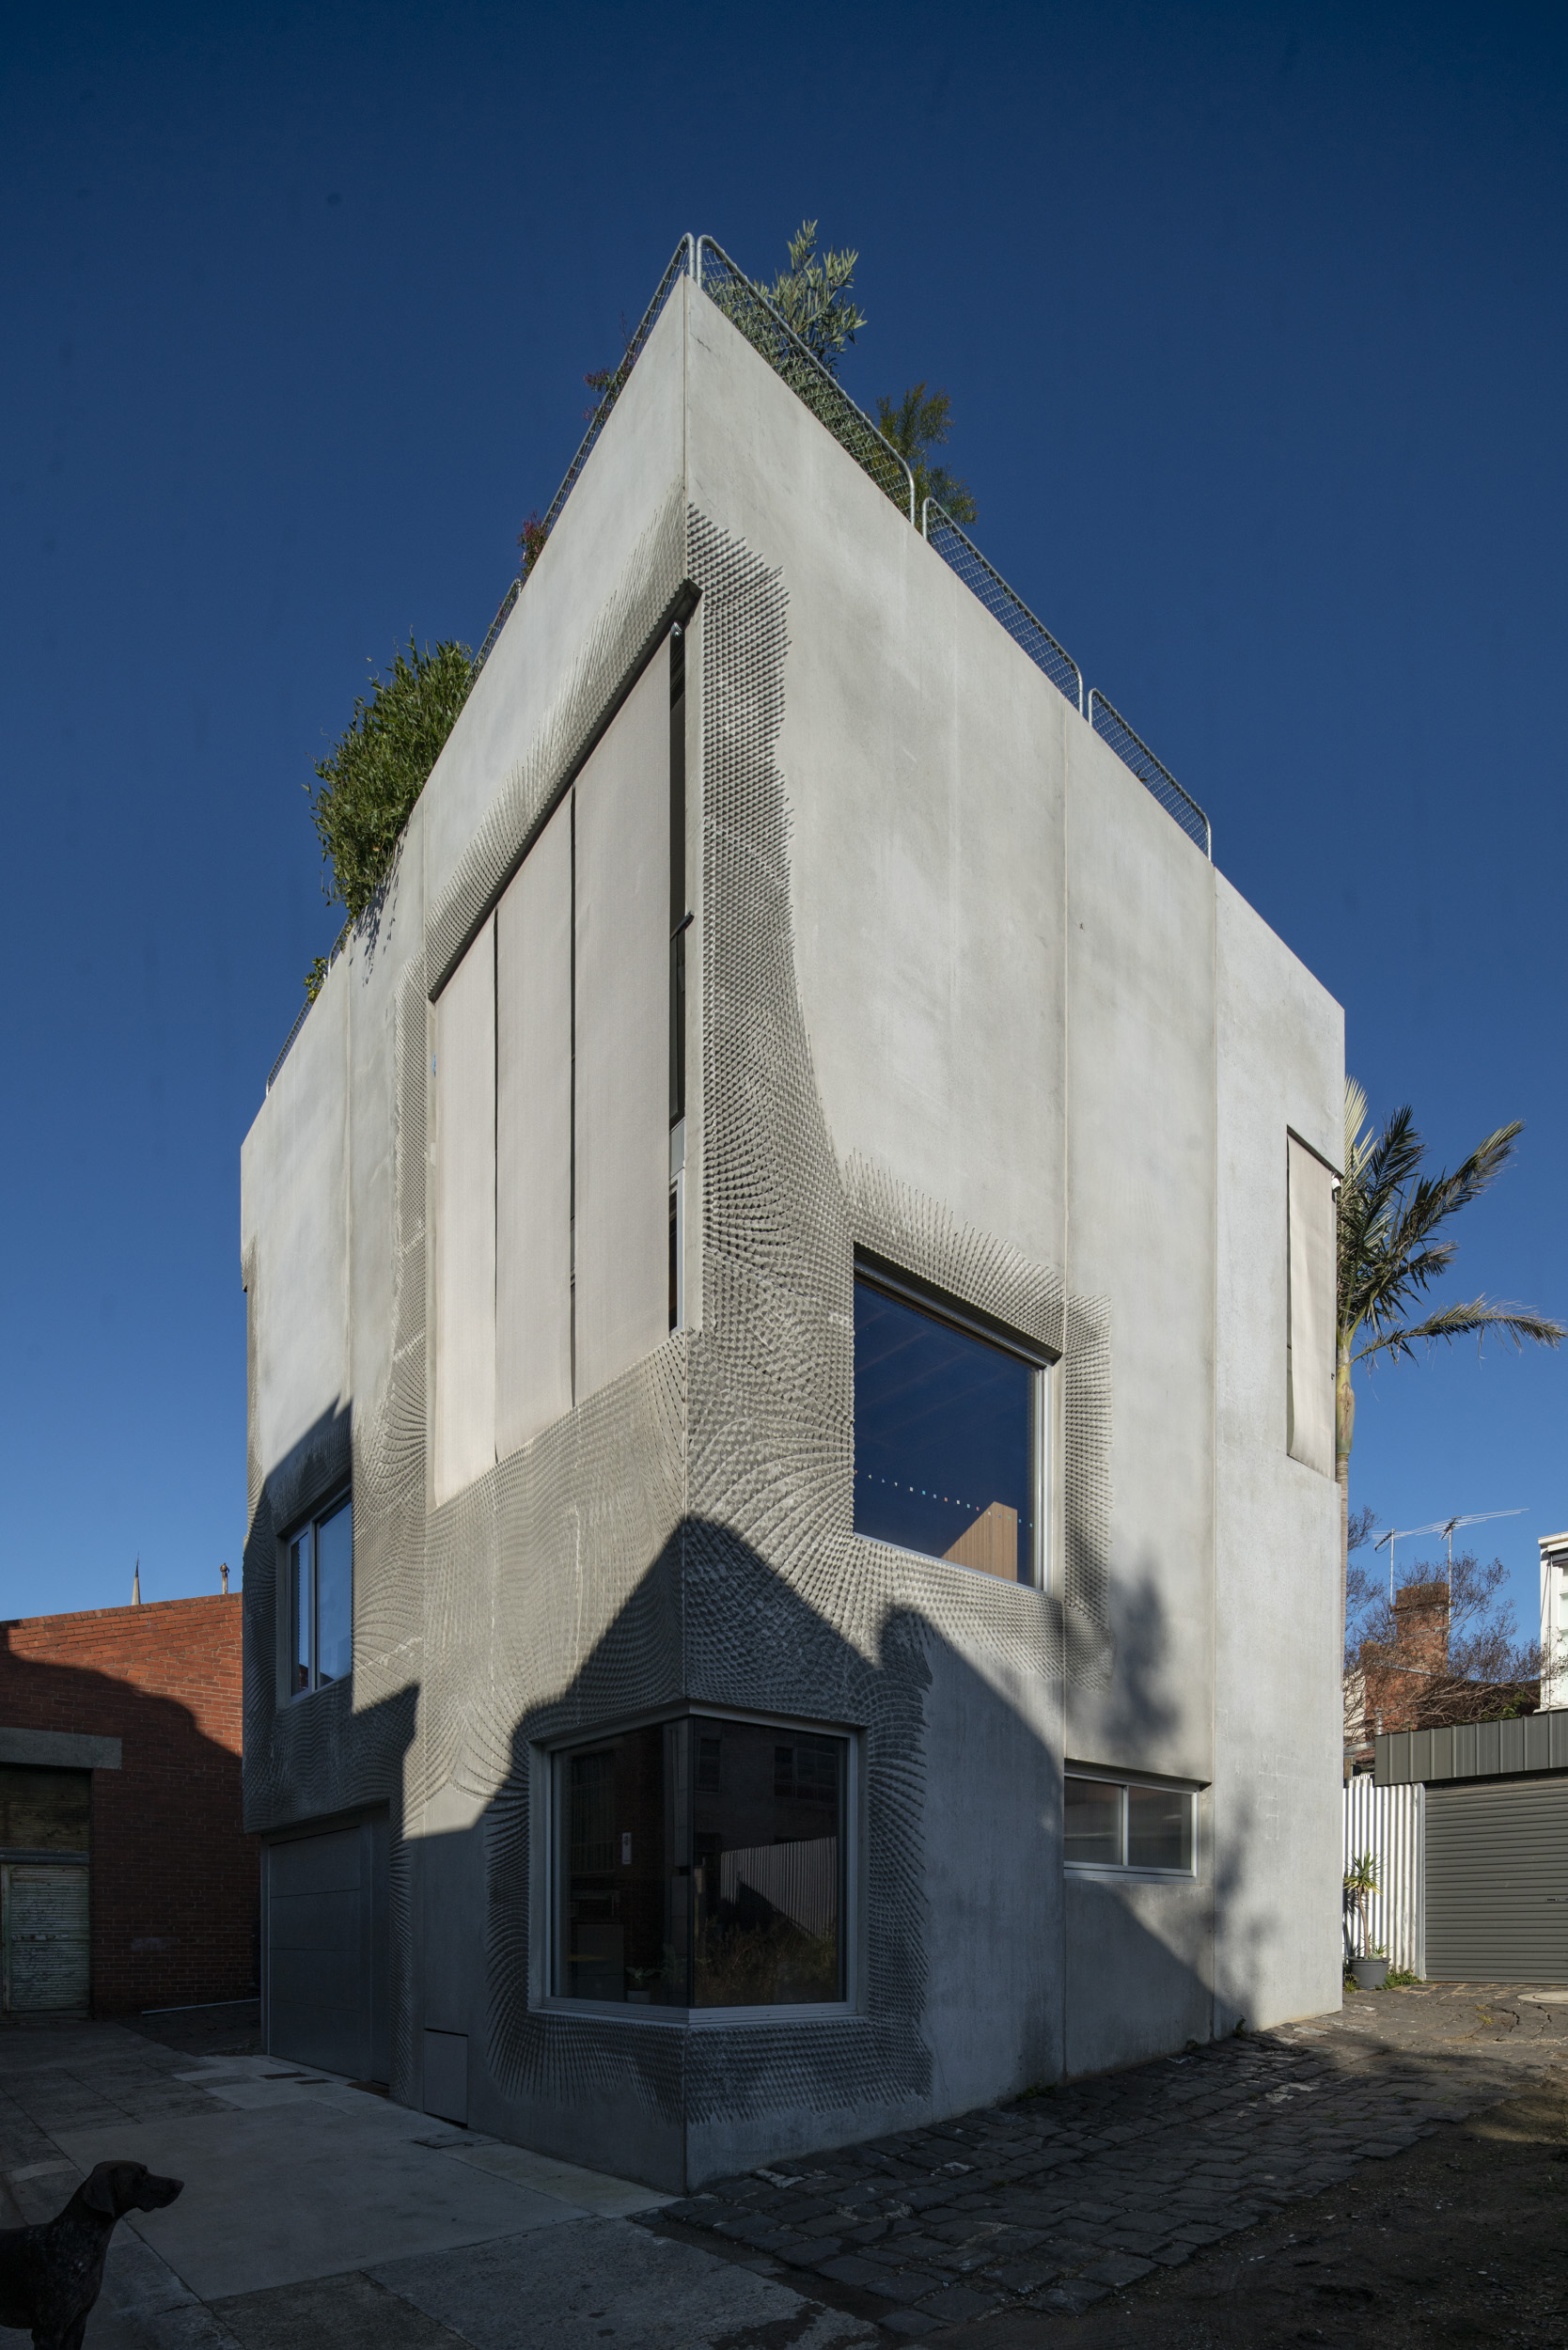 The completed 3 story concrete house with a rooftop garden